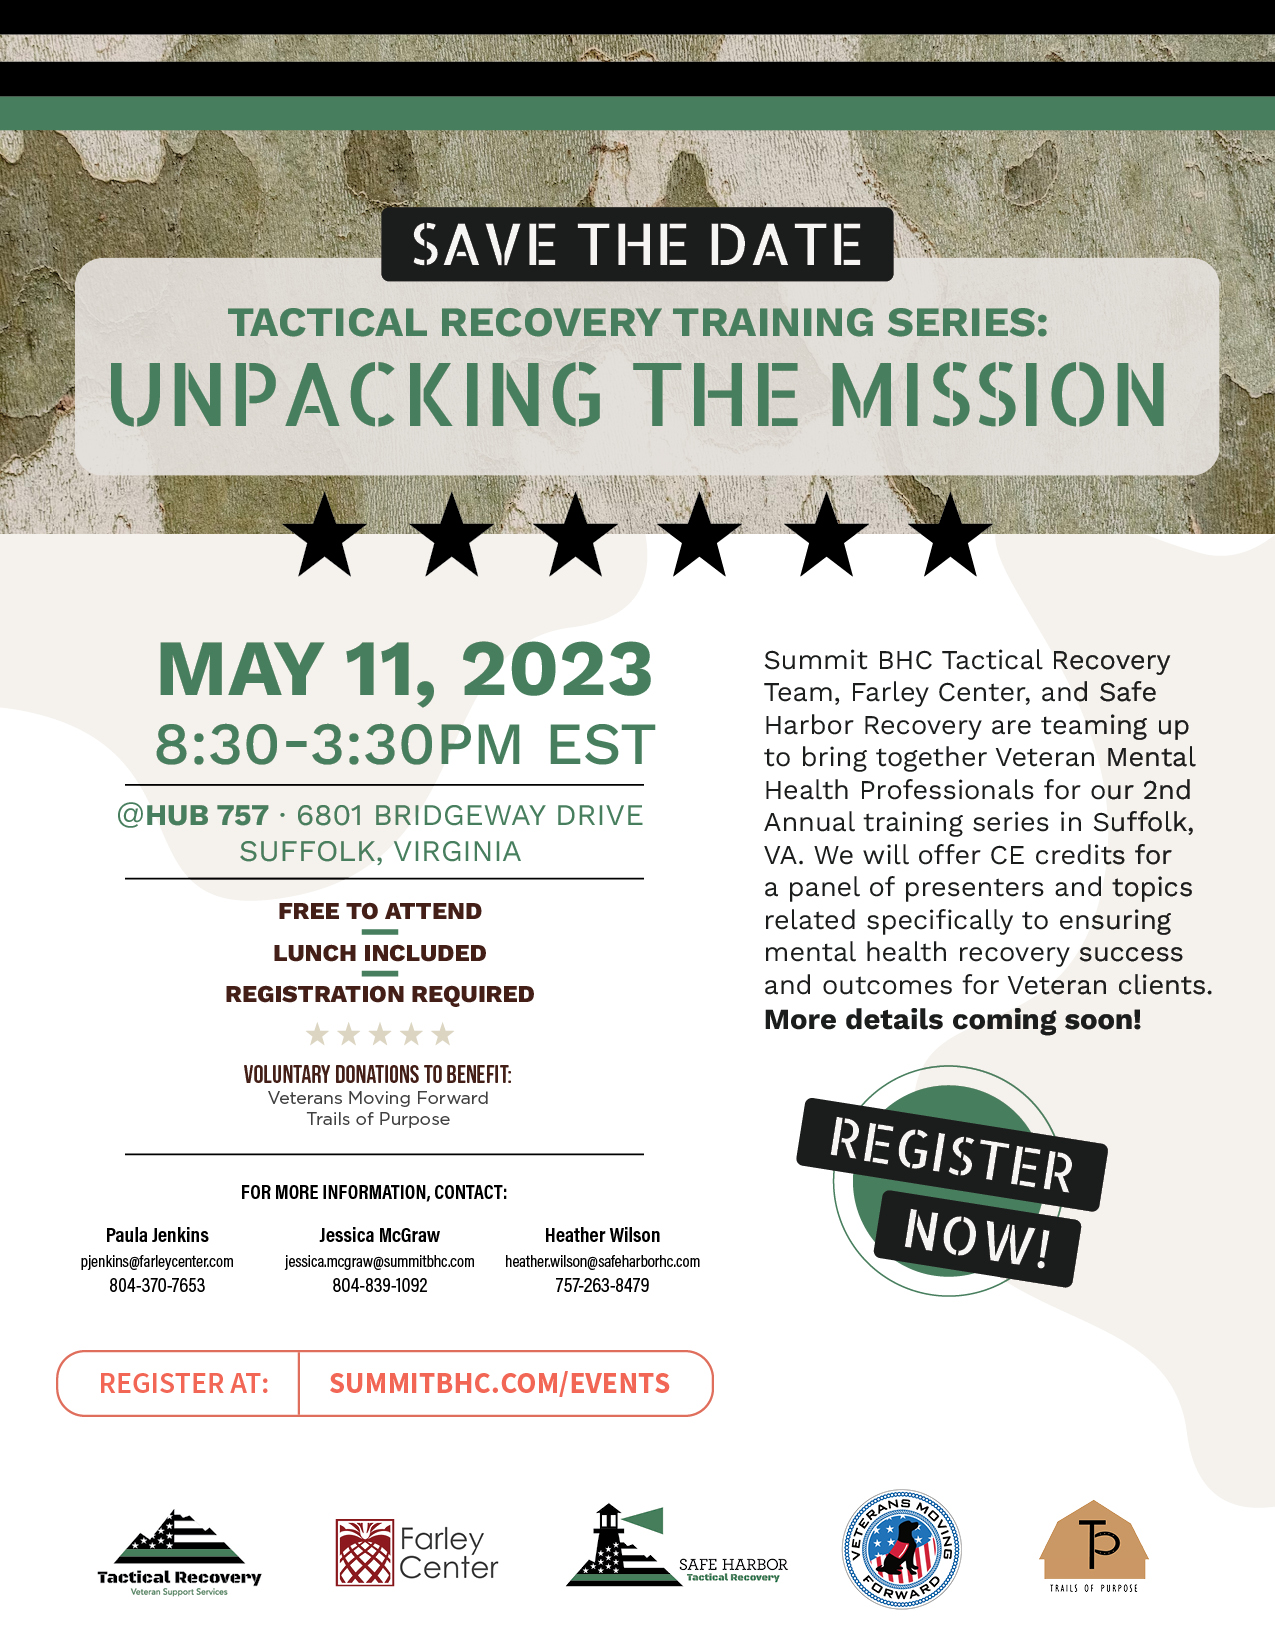 <br />
Unpacking the Mission. A Tactical Recovery Training Series Event